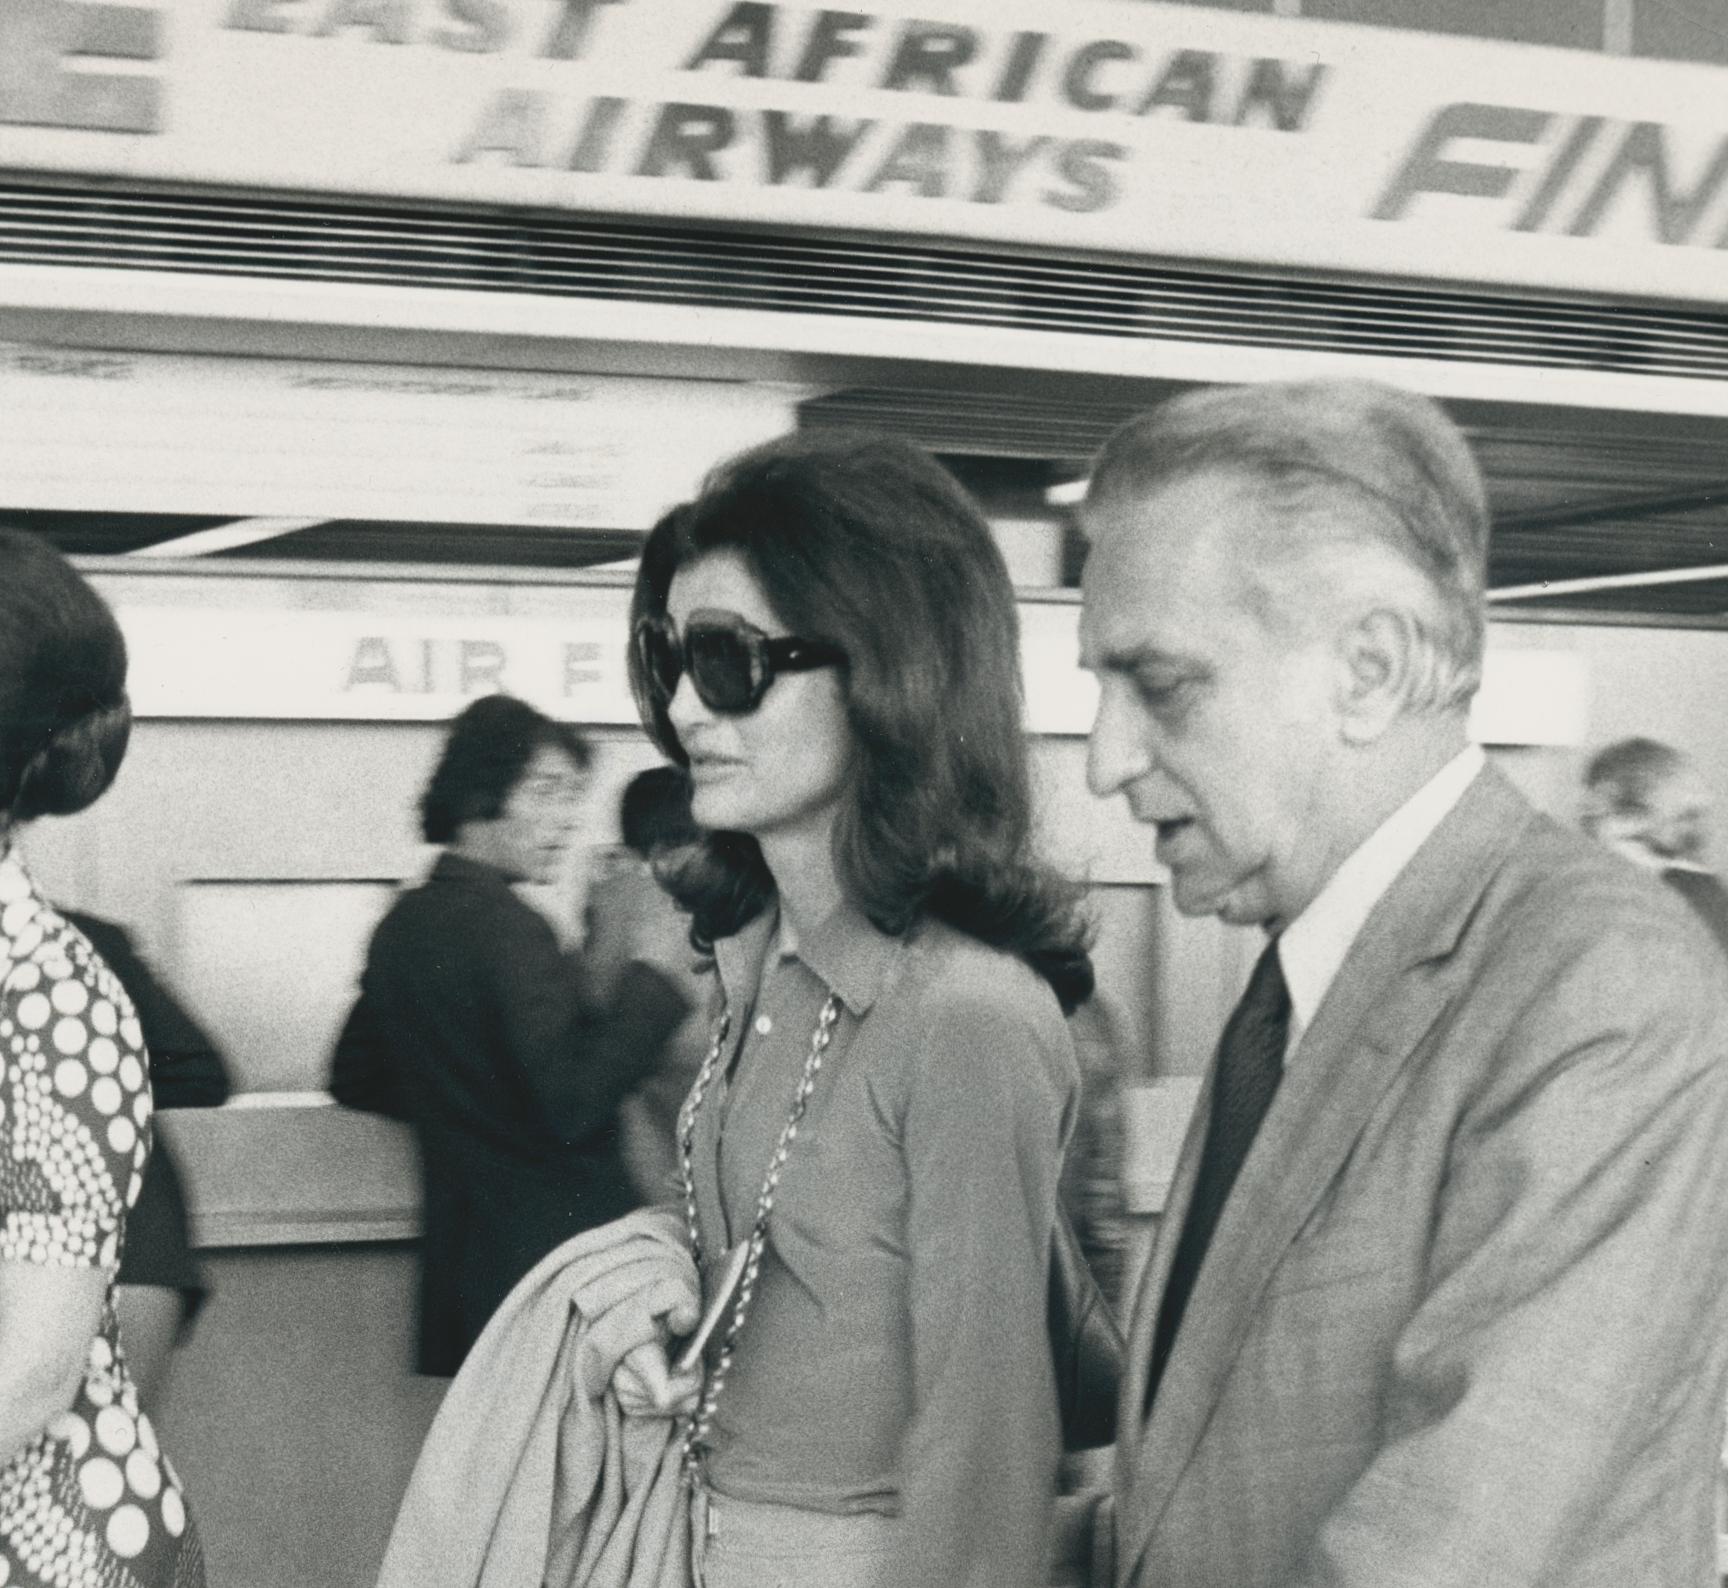 Jackie O. at the airport, Paris, France - Modern Photograph by Michel Giniès